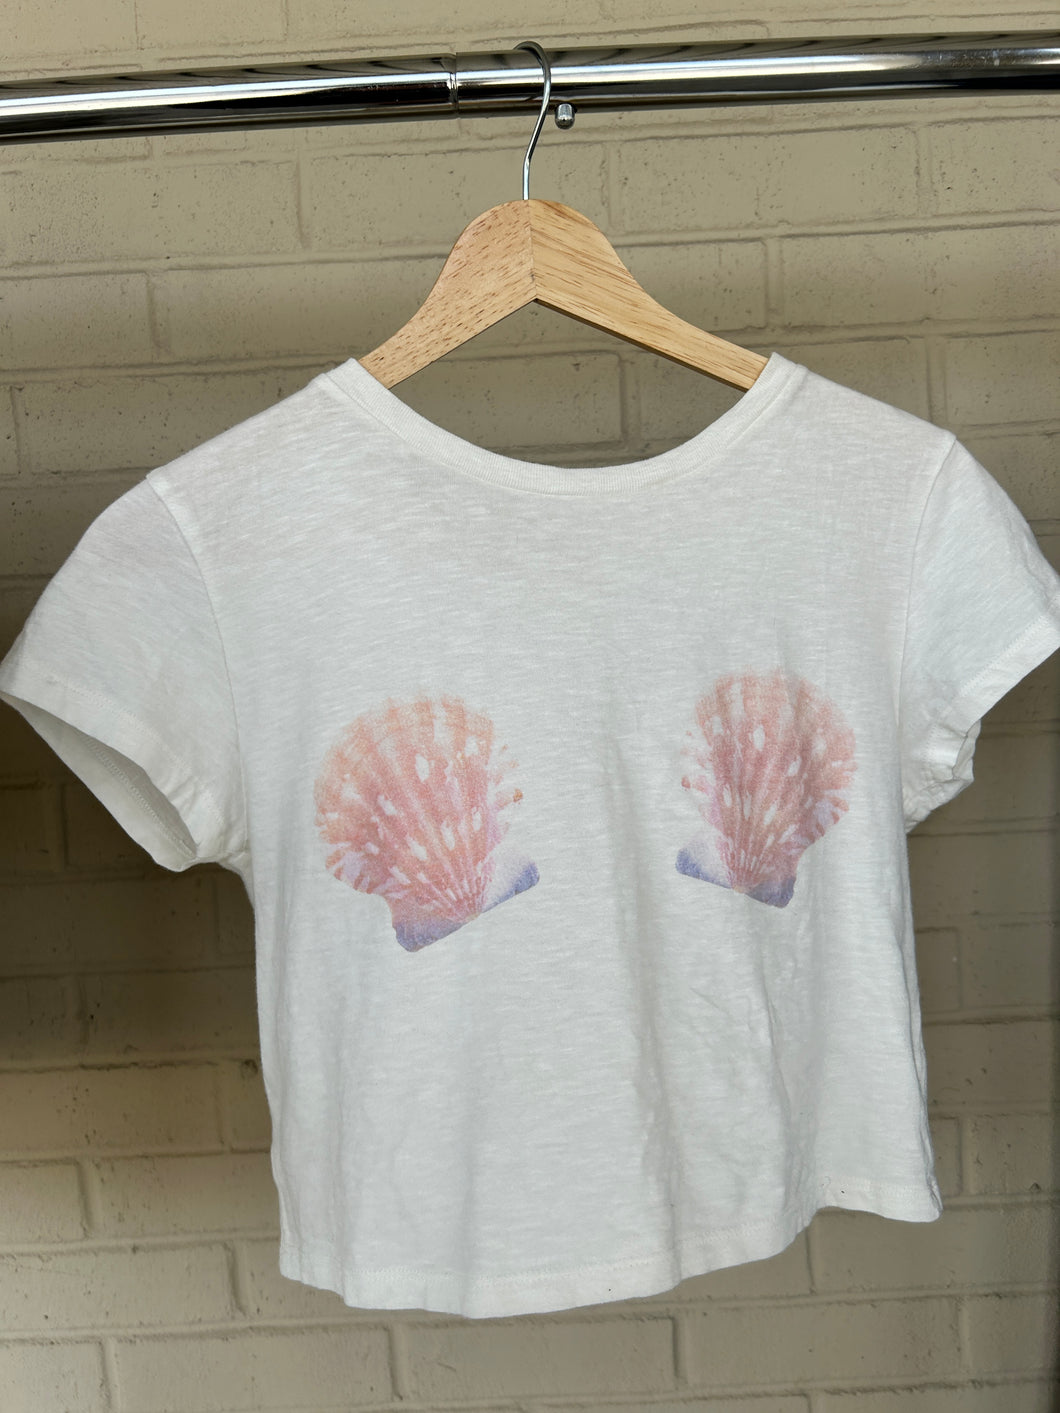 Aerie T-Shirt Size Small